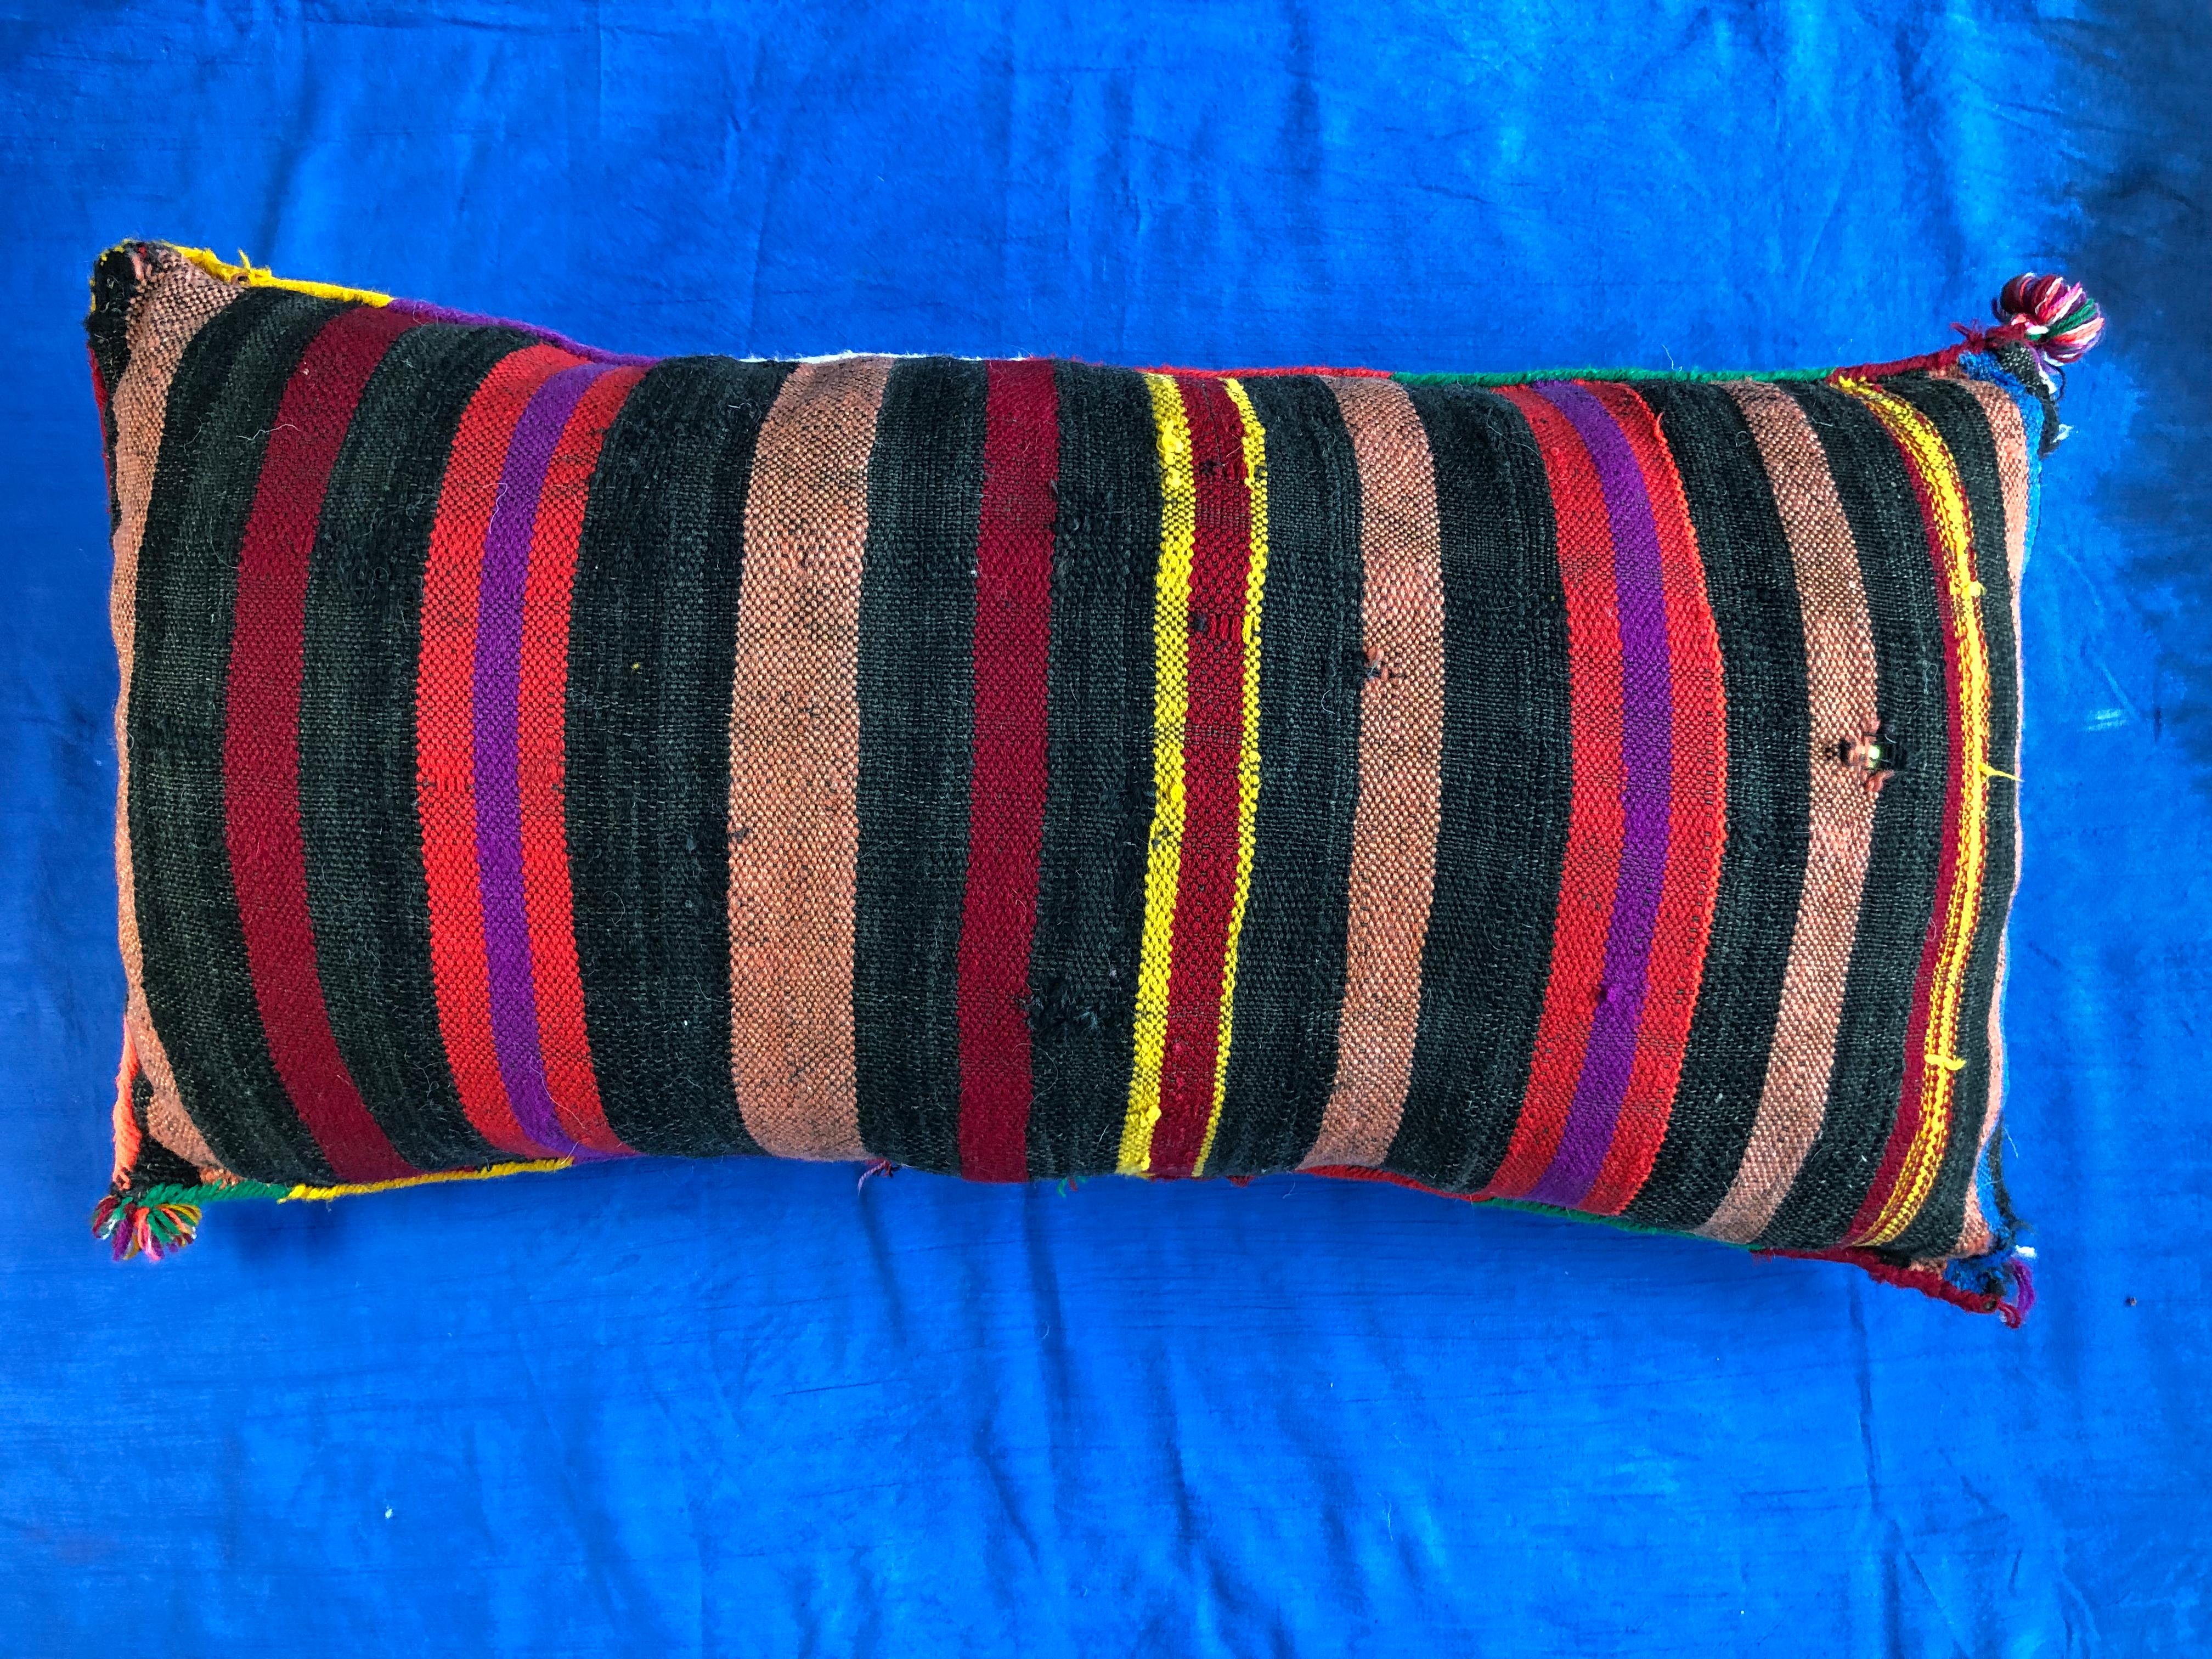 Moroccan Kilim Lumbar Pillow Vintage Handwoven Natural Wool Tassels Boho Bold In Good Condition For Sale In Vineyard Haven, MA